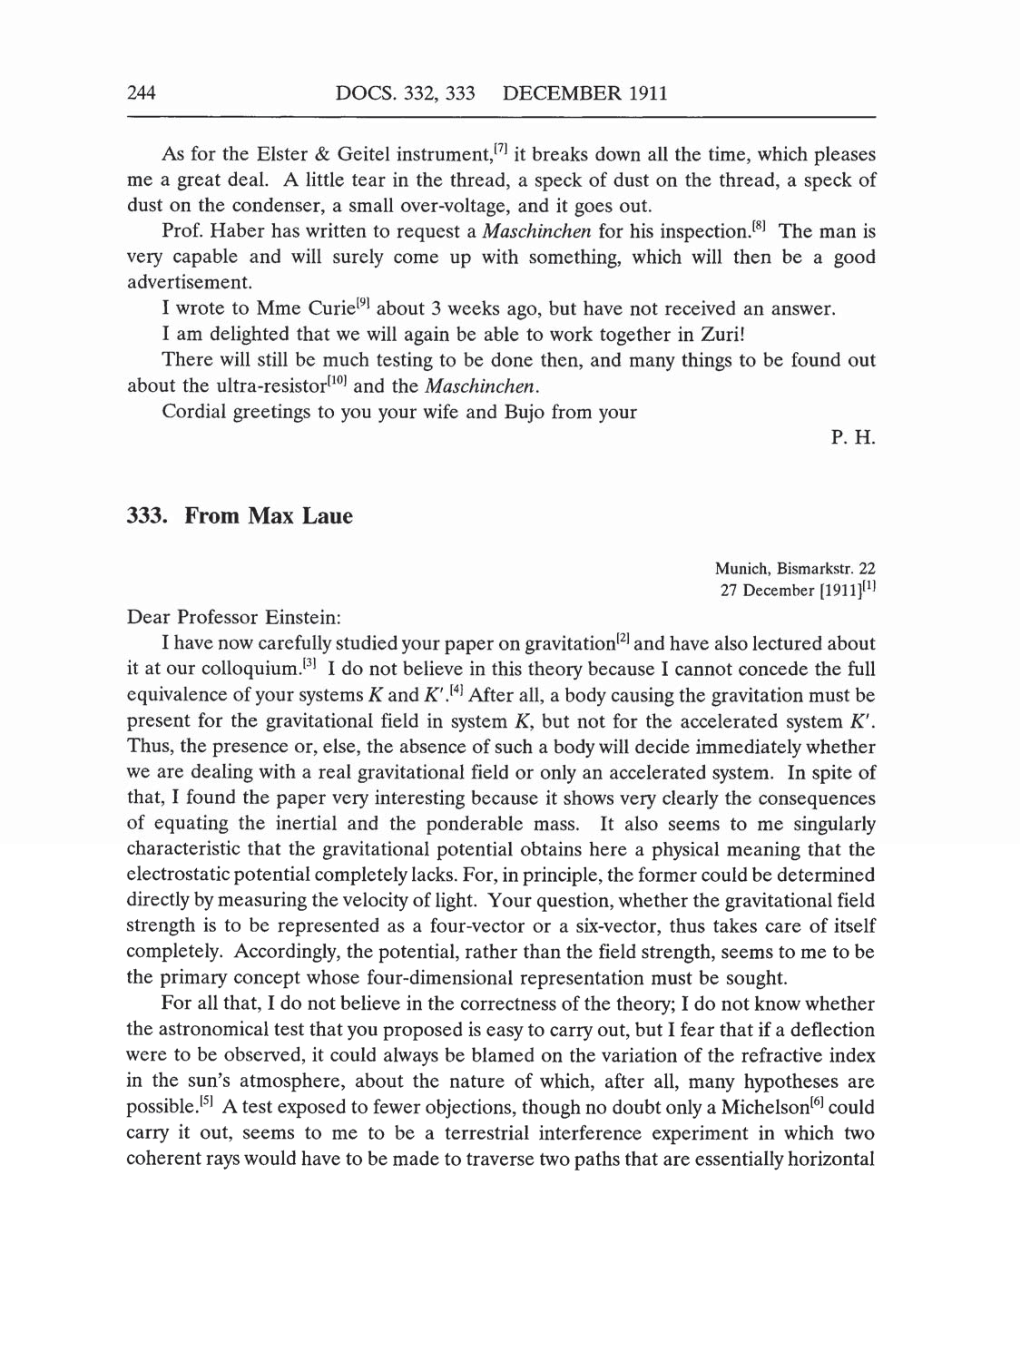 Volume 5: The Swiss Years: Correspondence, 1902-1914 (English translation supplement) page 244